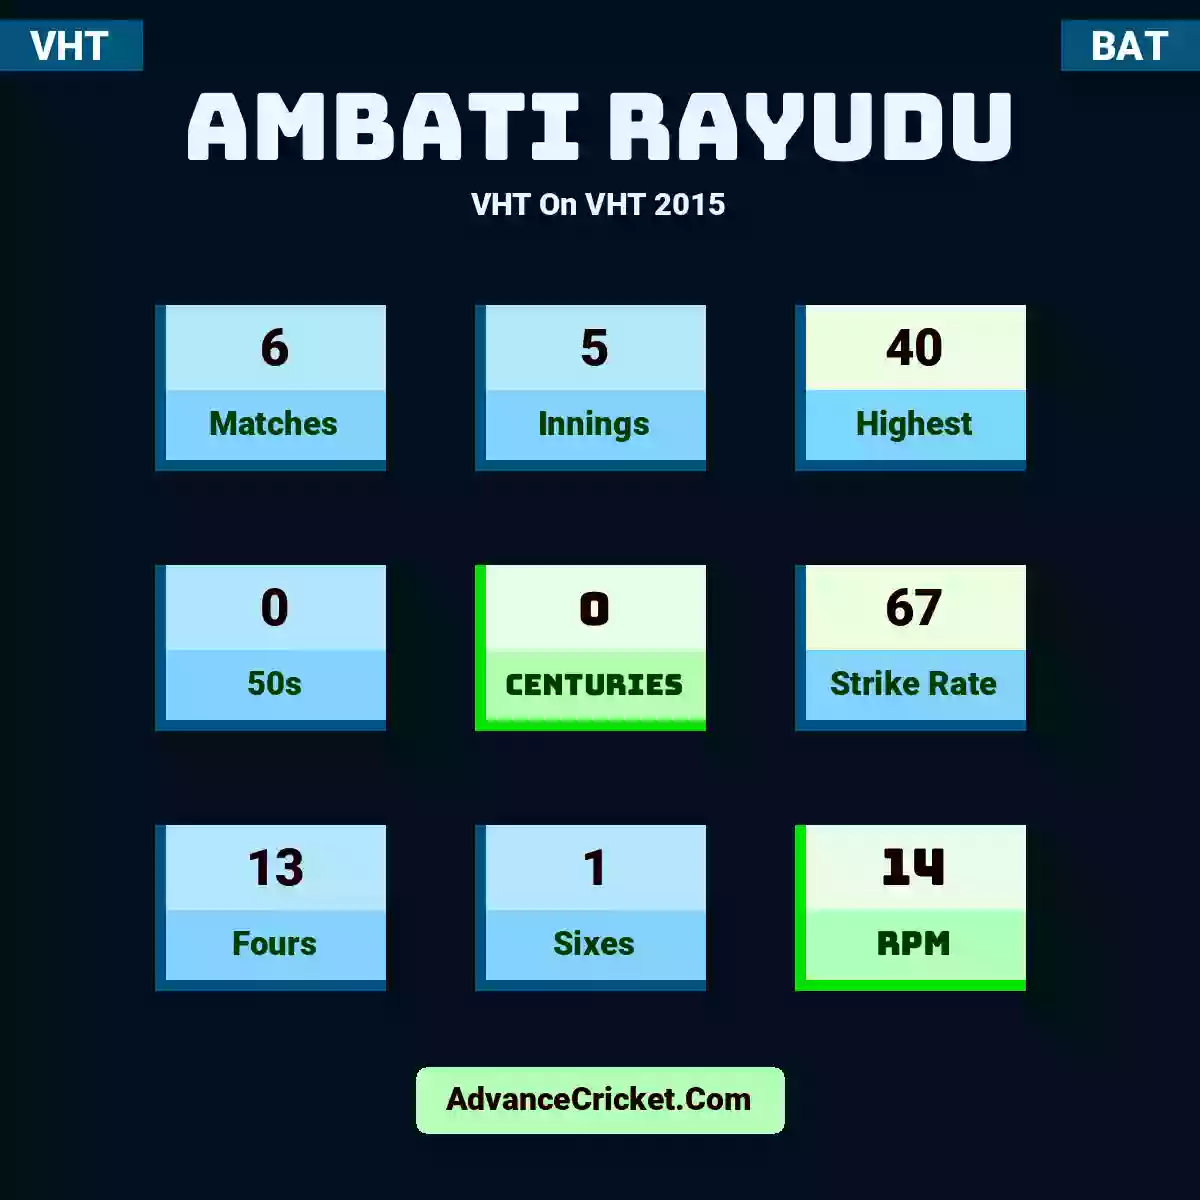 Ambati Rayudu VHT  On VHT 2015, Ambati Rayudu played 6 matches, scored 40 runs as highest, 0 half-centuries, and 0 centuries, with a strike rate of 67. A.Rayudu hit 13 fours and 1 sixes, with an RPM of 14.